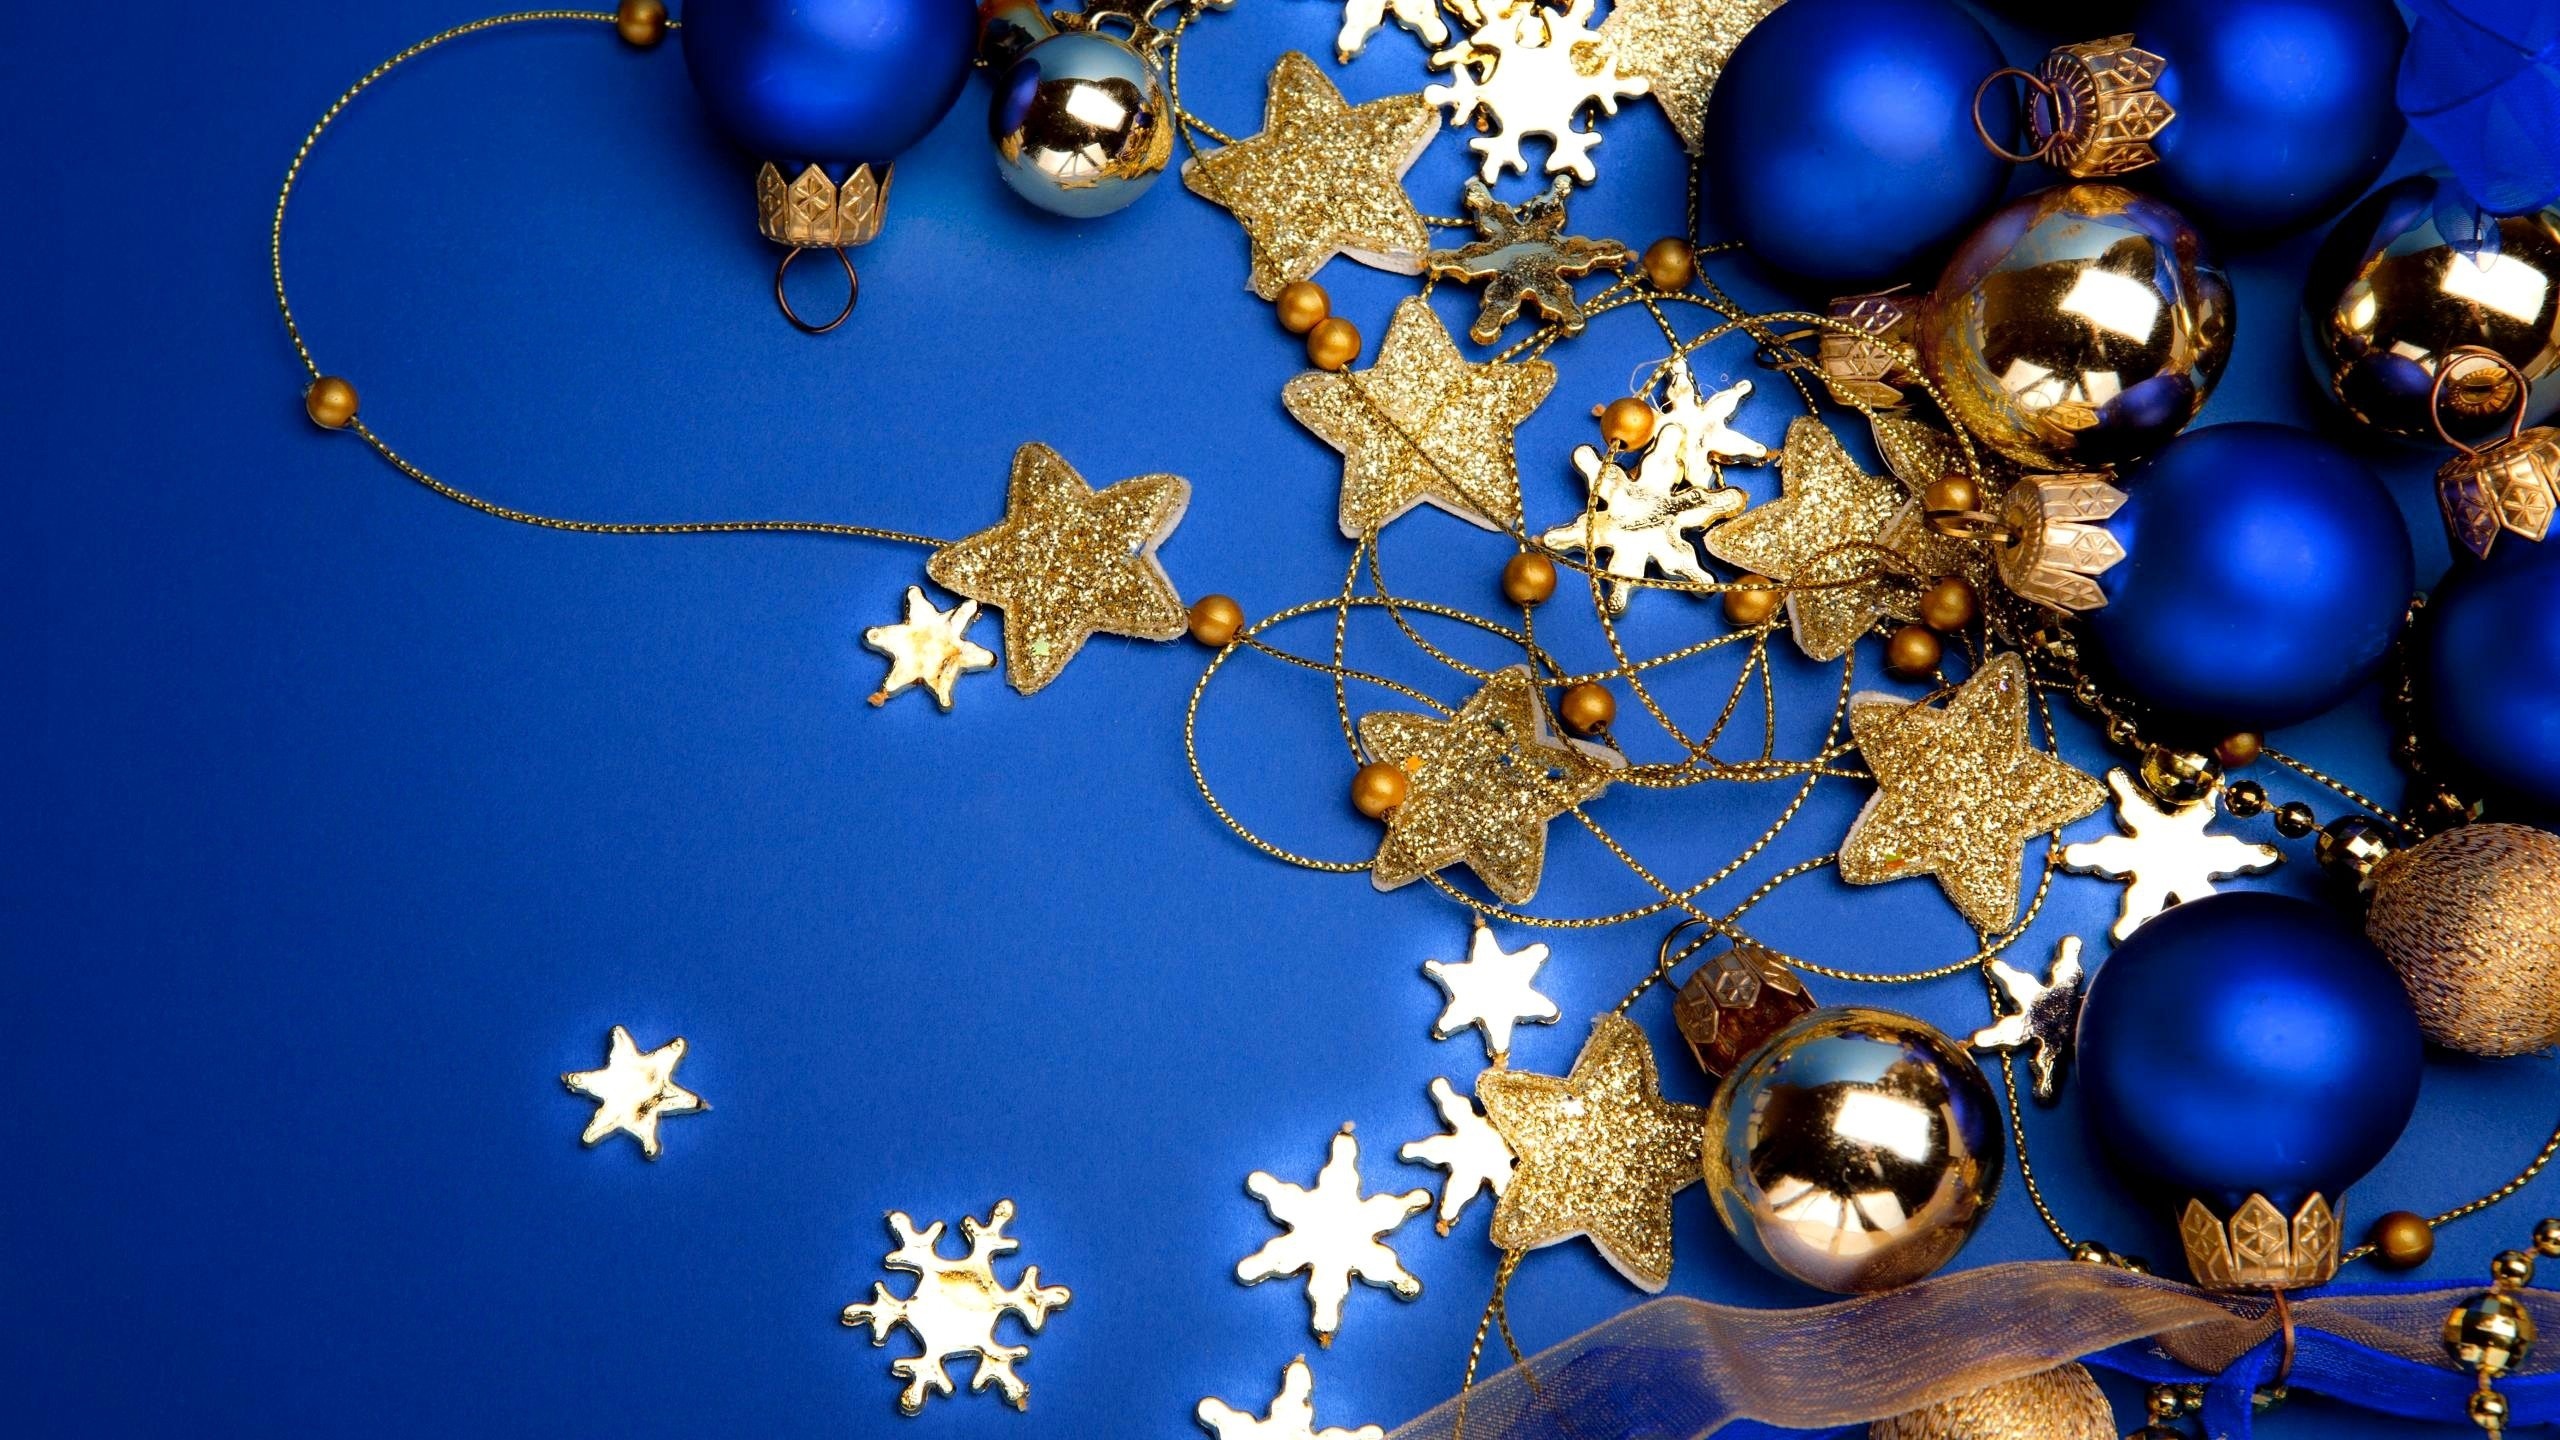 2560x1440 ... blue christmas hd wallpaper hd wallpapers gifs backgrounds images ...